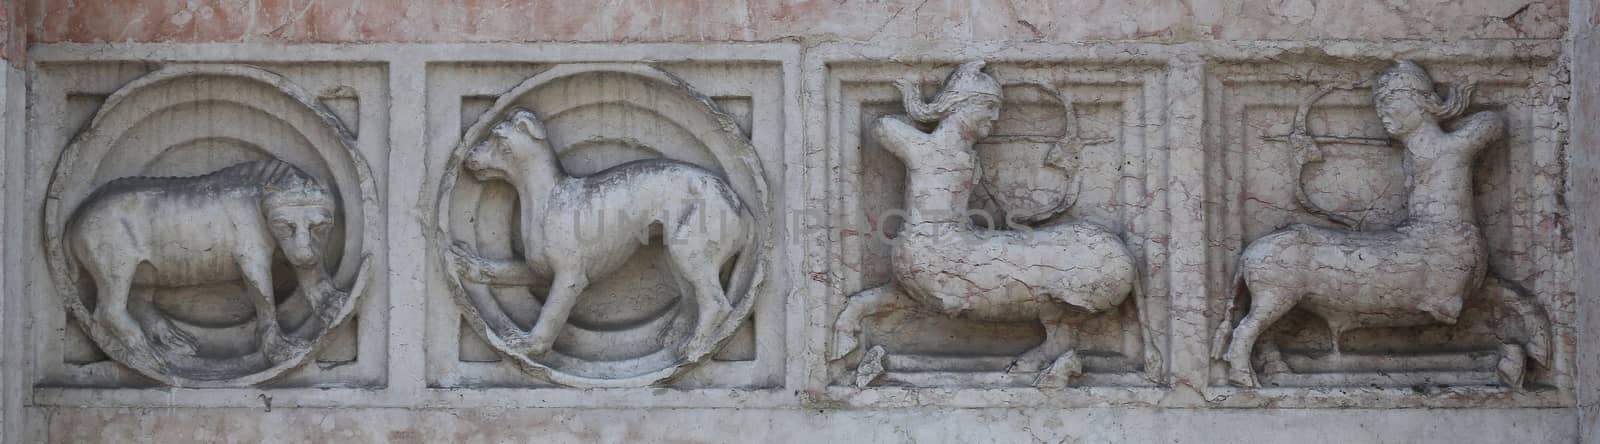 Detail of some marble medieval bas relief outside the Baptistery in Parma, Italy by atlas